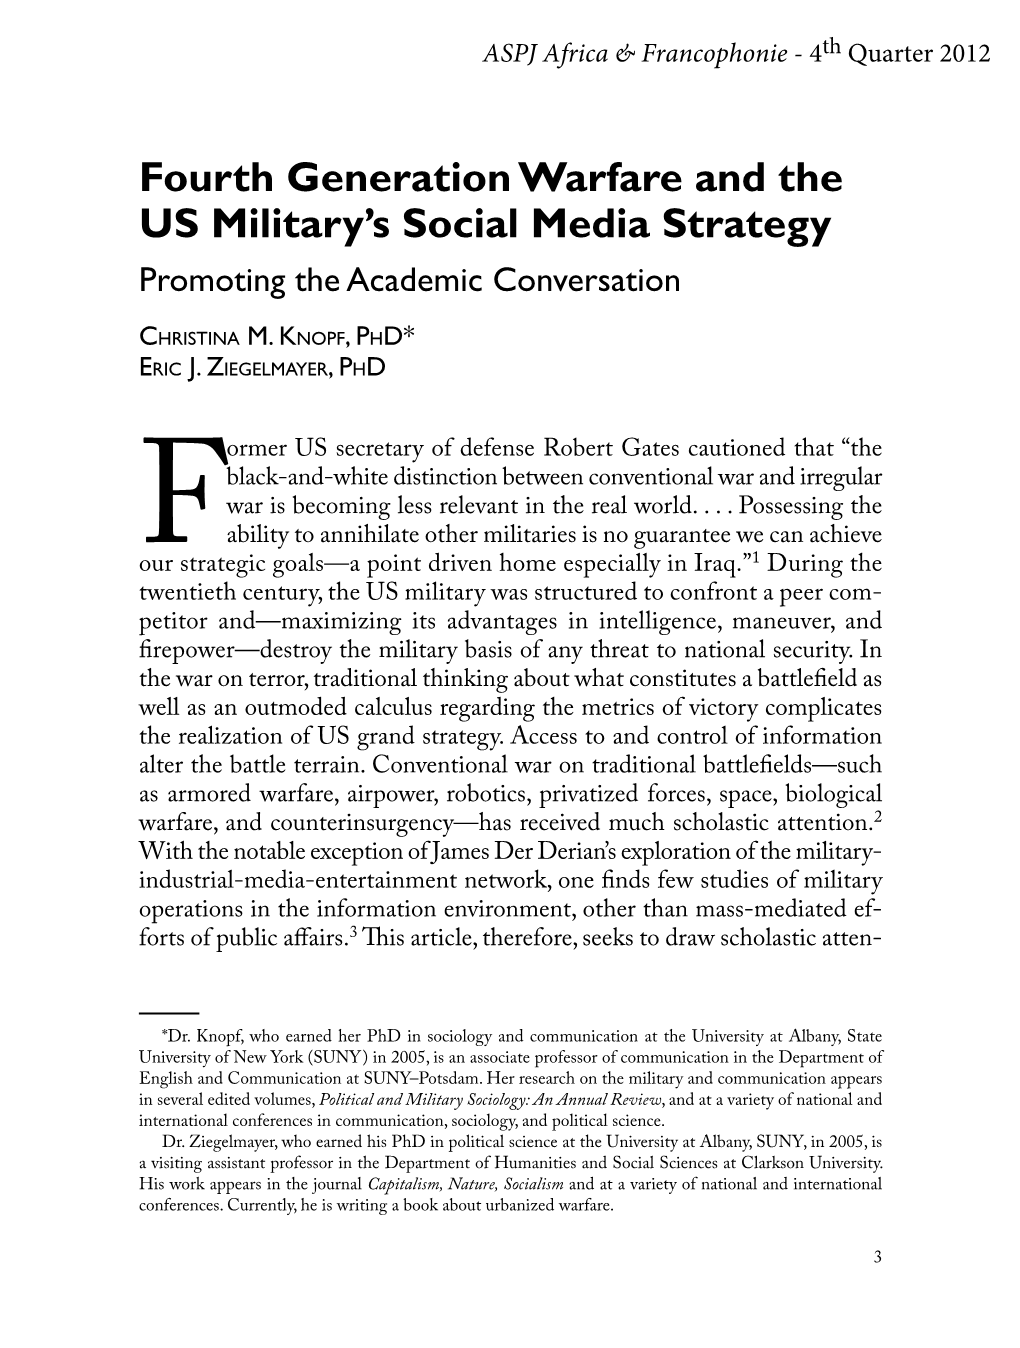 Fourth Generation Warfare and the US Military's Social Media Strategy